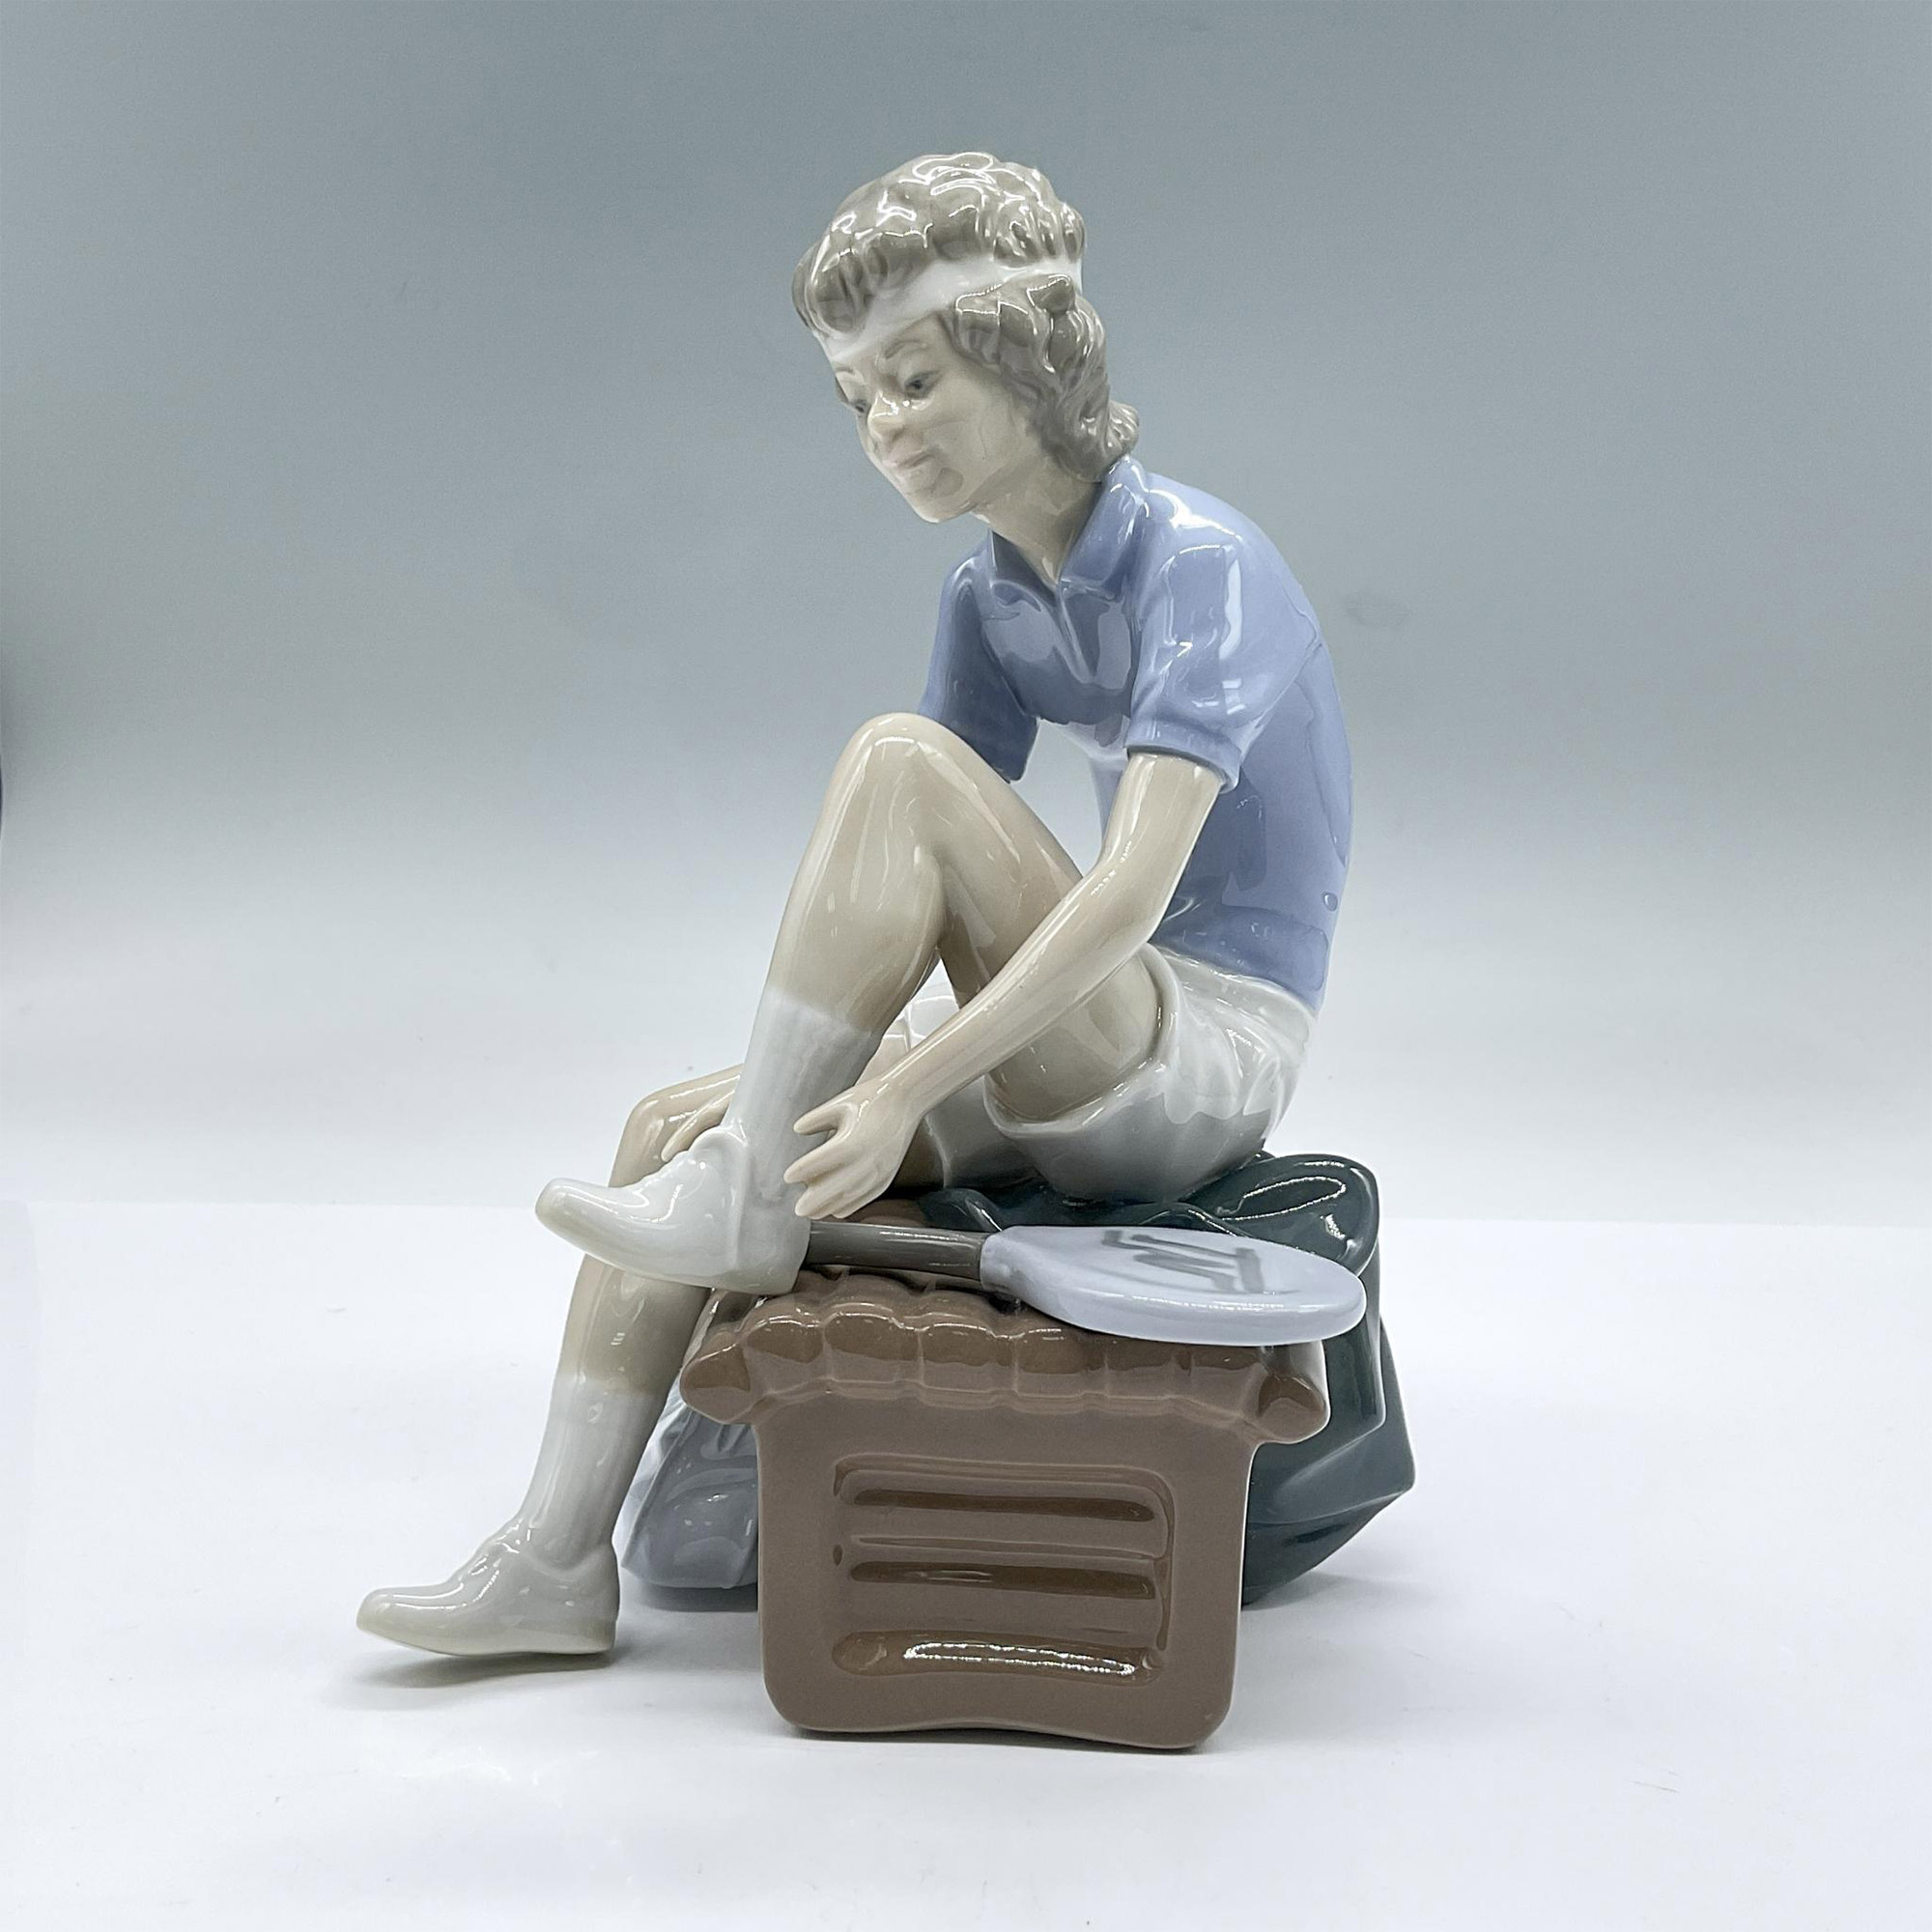 Match Time - Nao by Lladro Porcelain Figurine - Image 2 of 4